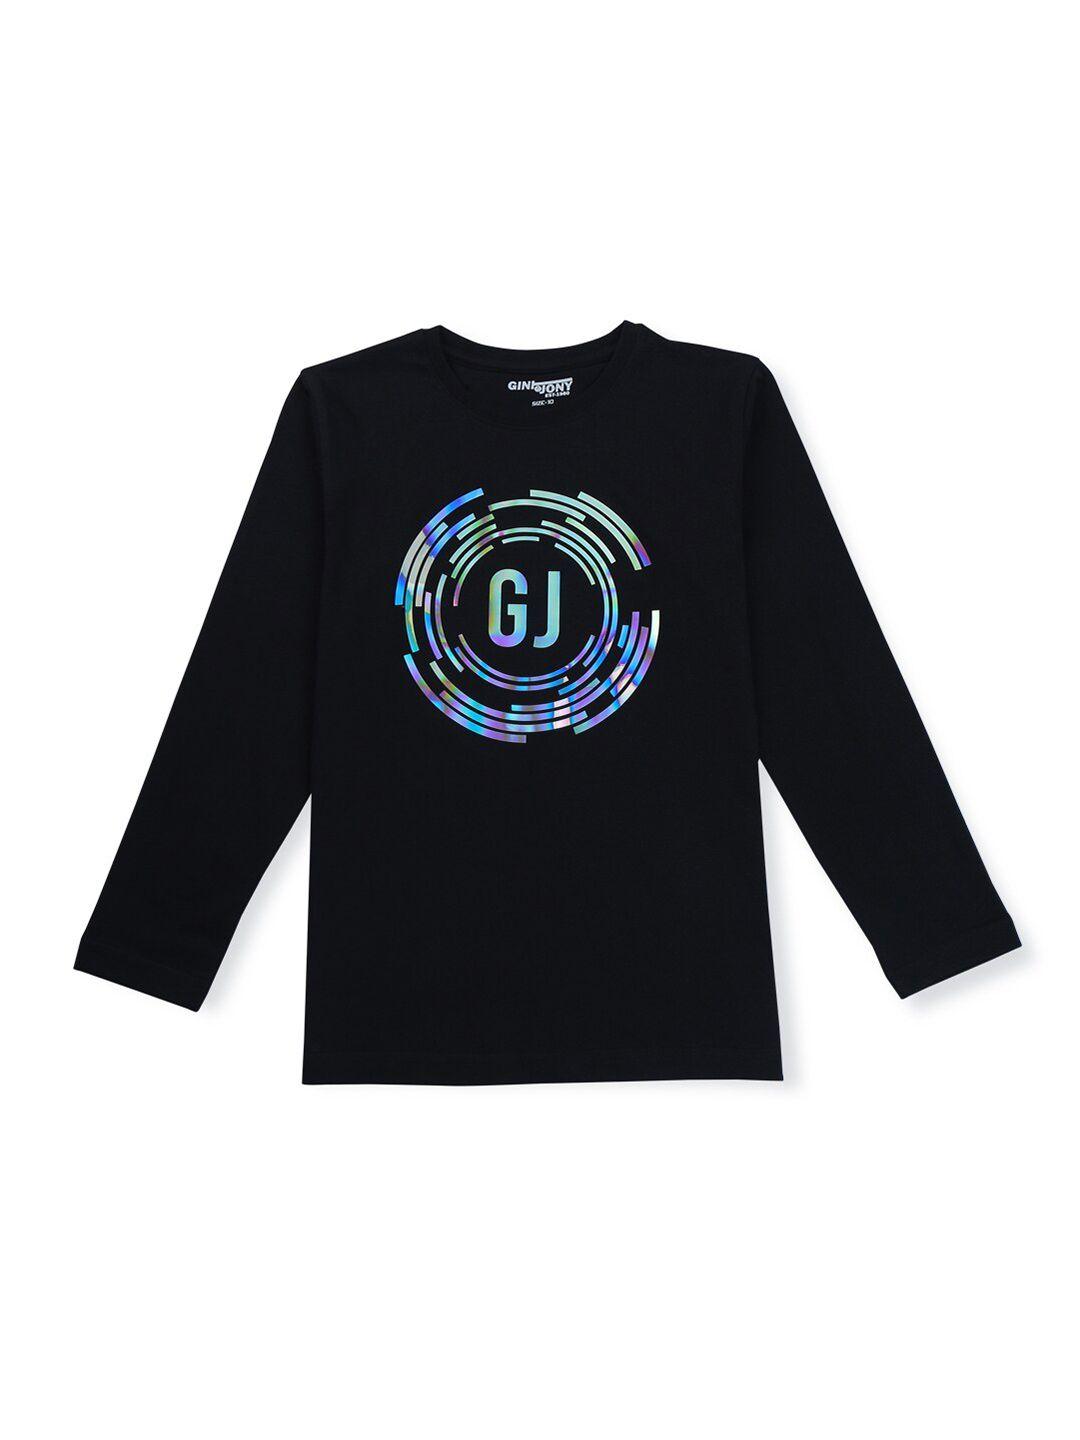 gini-and-jony-boys-graphic-printed-round-neck-long-sleeves-cotton-t-shirt